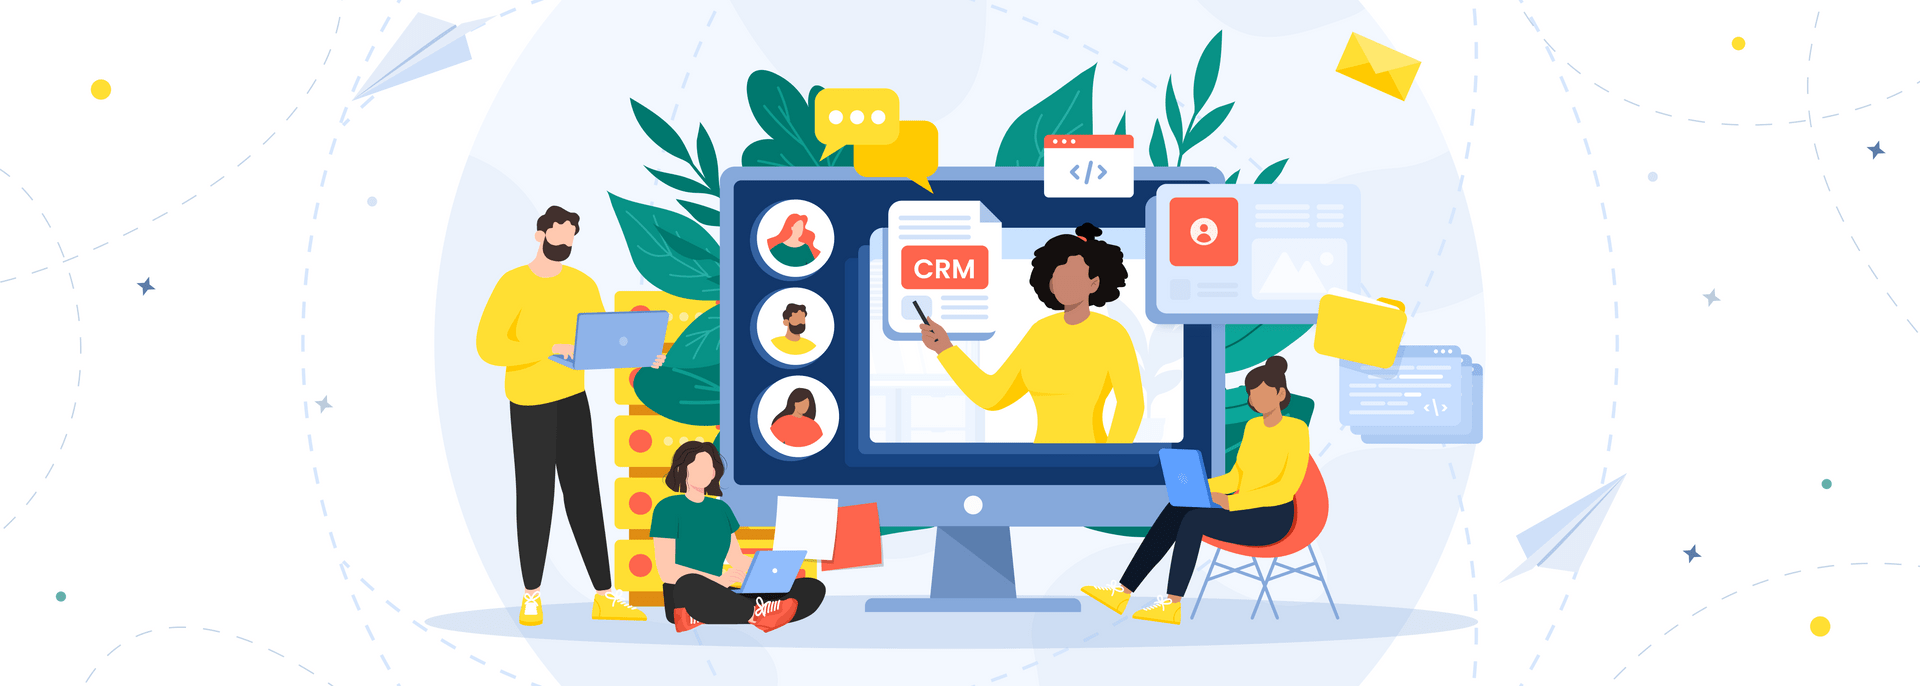 How to Build a CRM System